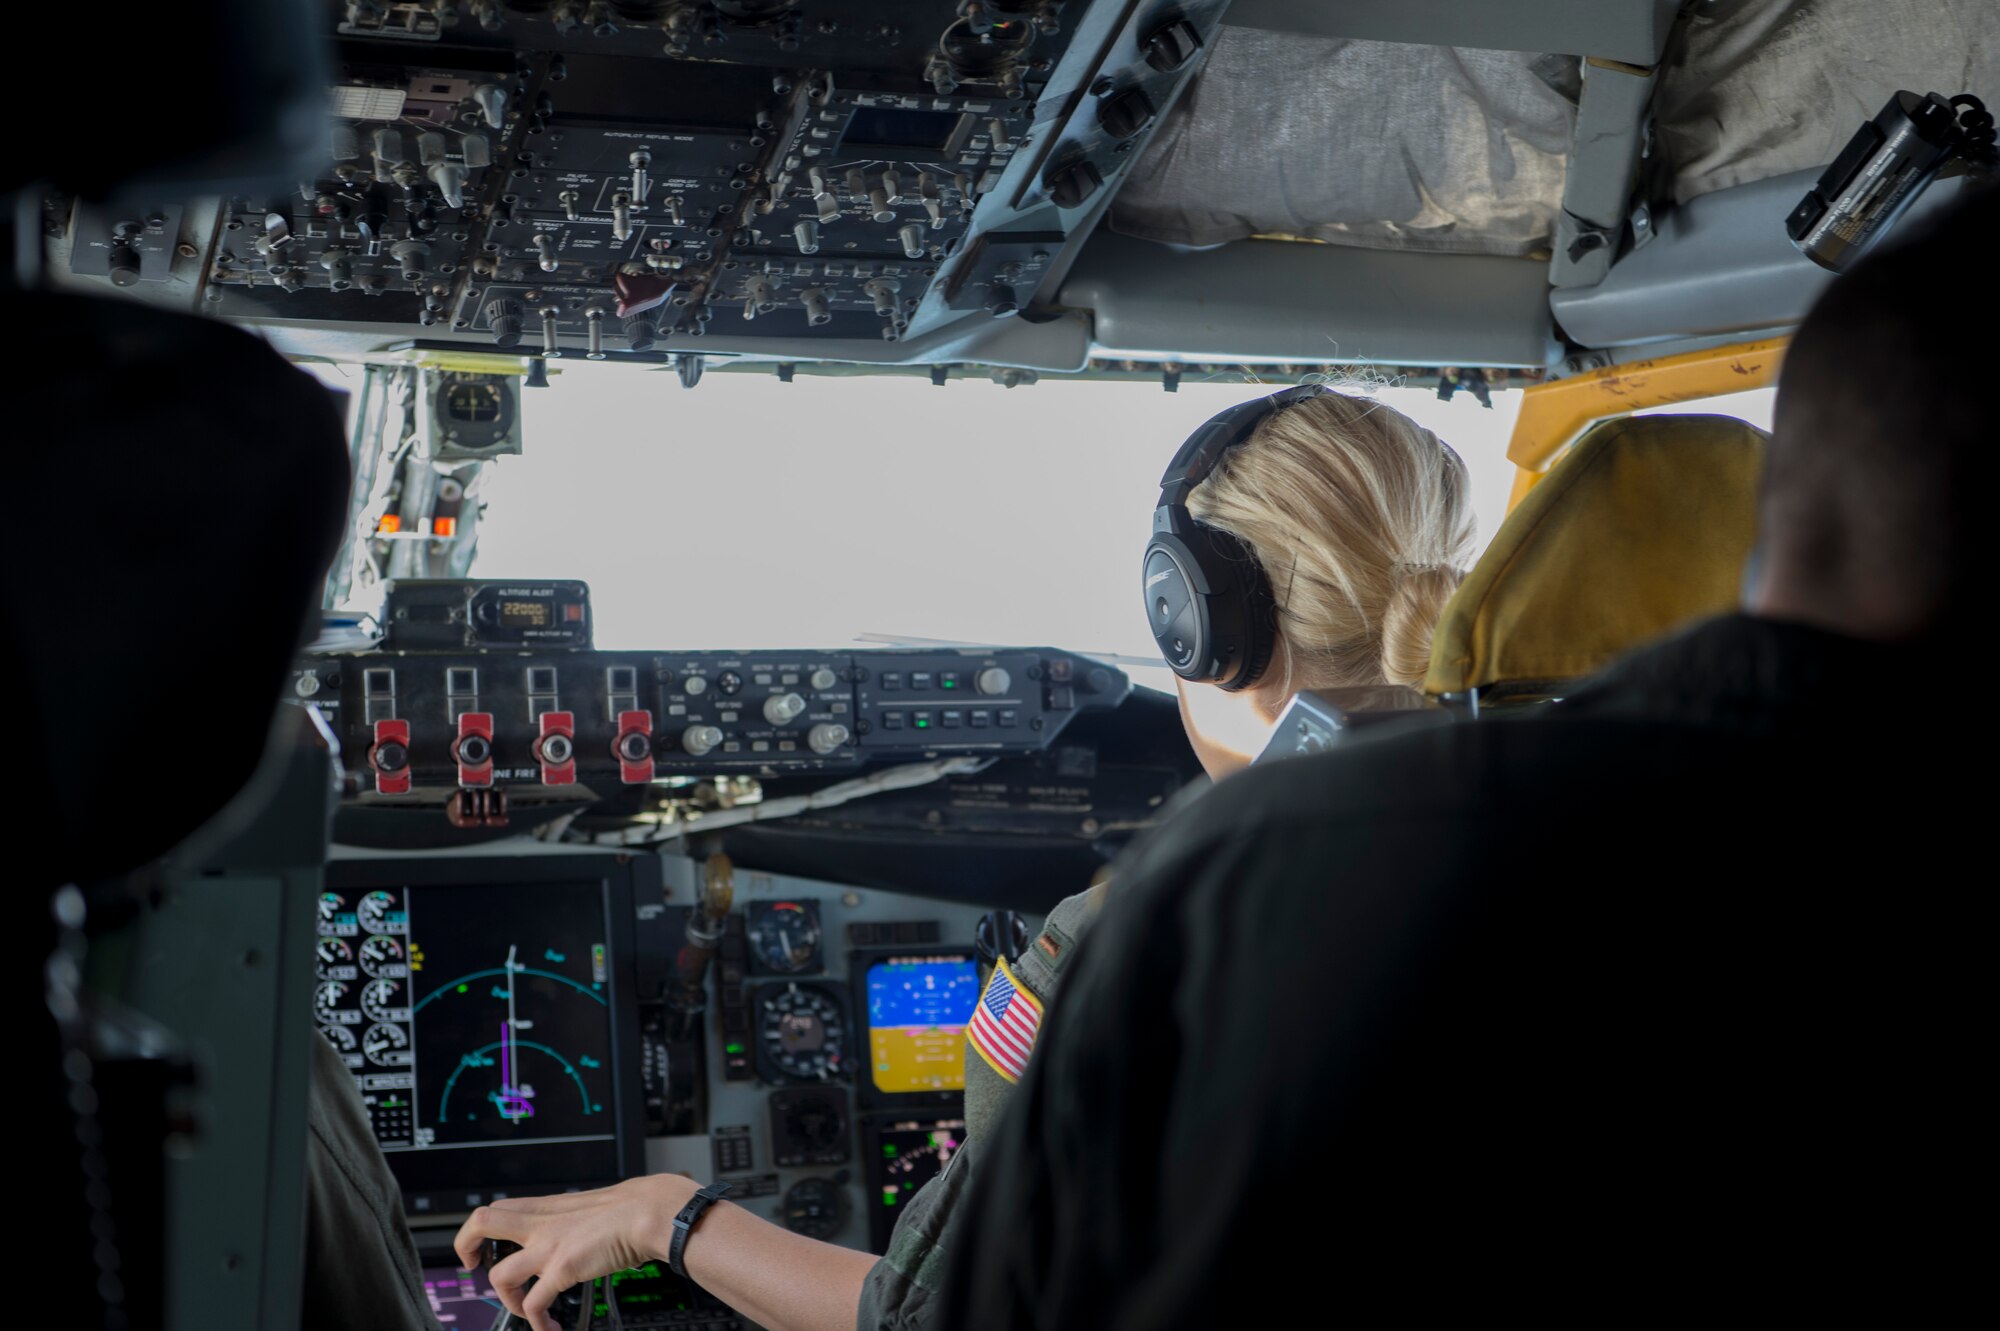 U.S. Air Force 2nd Lt. Michelle Christensen, a 63rd Air Refueling Squadron pilot, operates the controls of a KC-135 Stratotanker during a refueling mission Nov. 4, 2019.  Christensen successfully completed her first flight, while providing air refueling support to the national global strike and strategic deterrence mission.